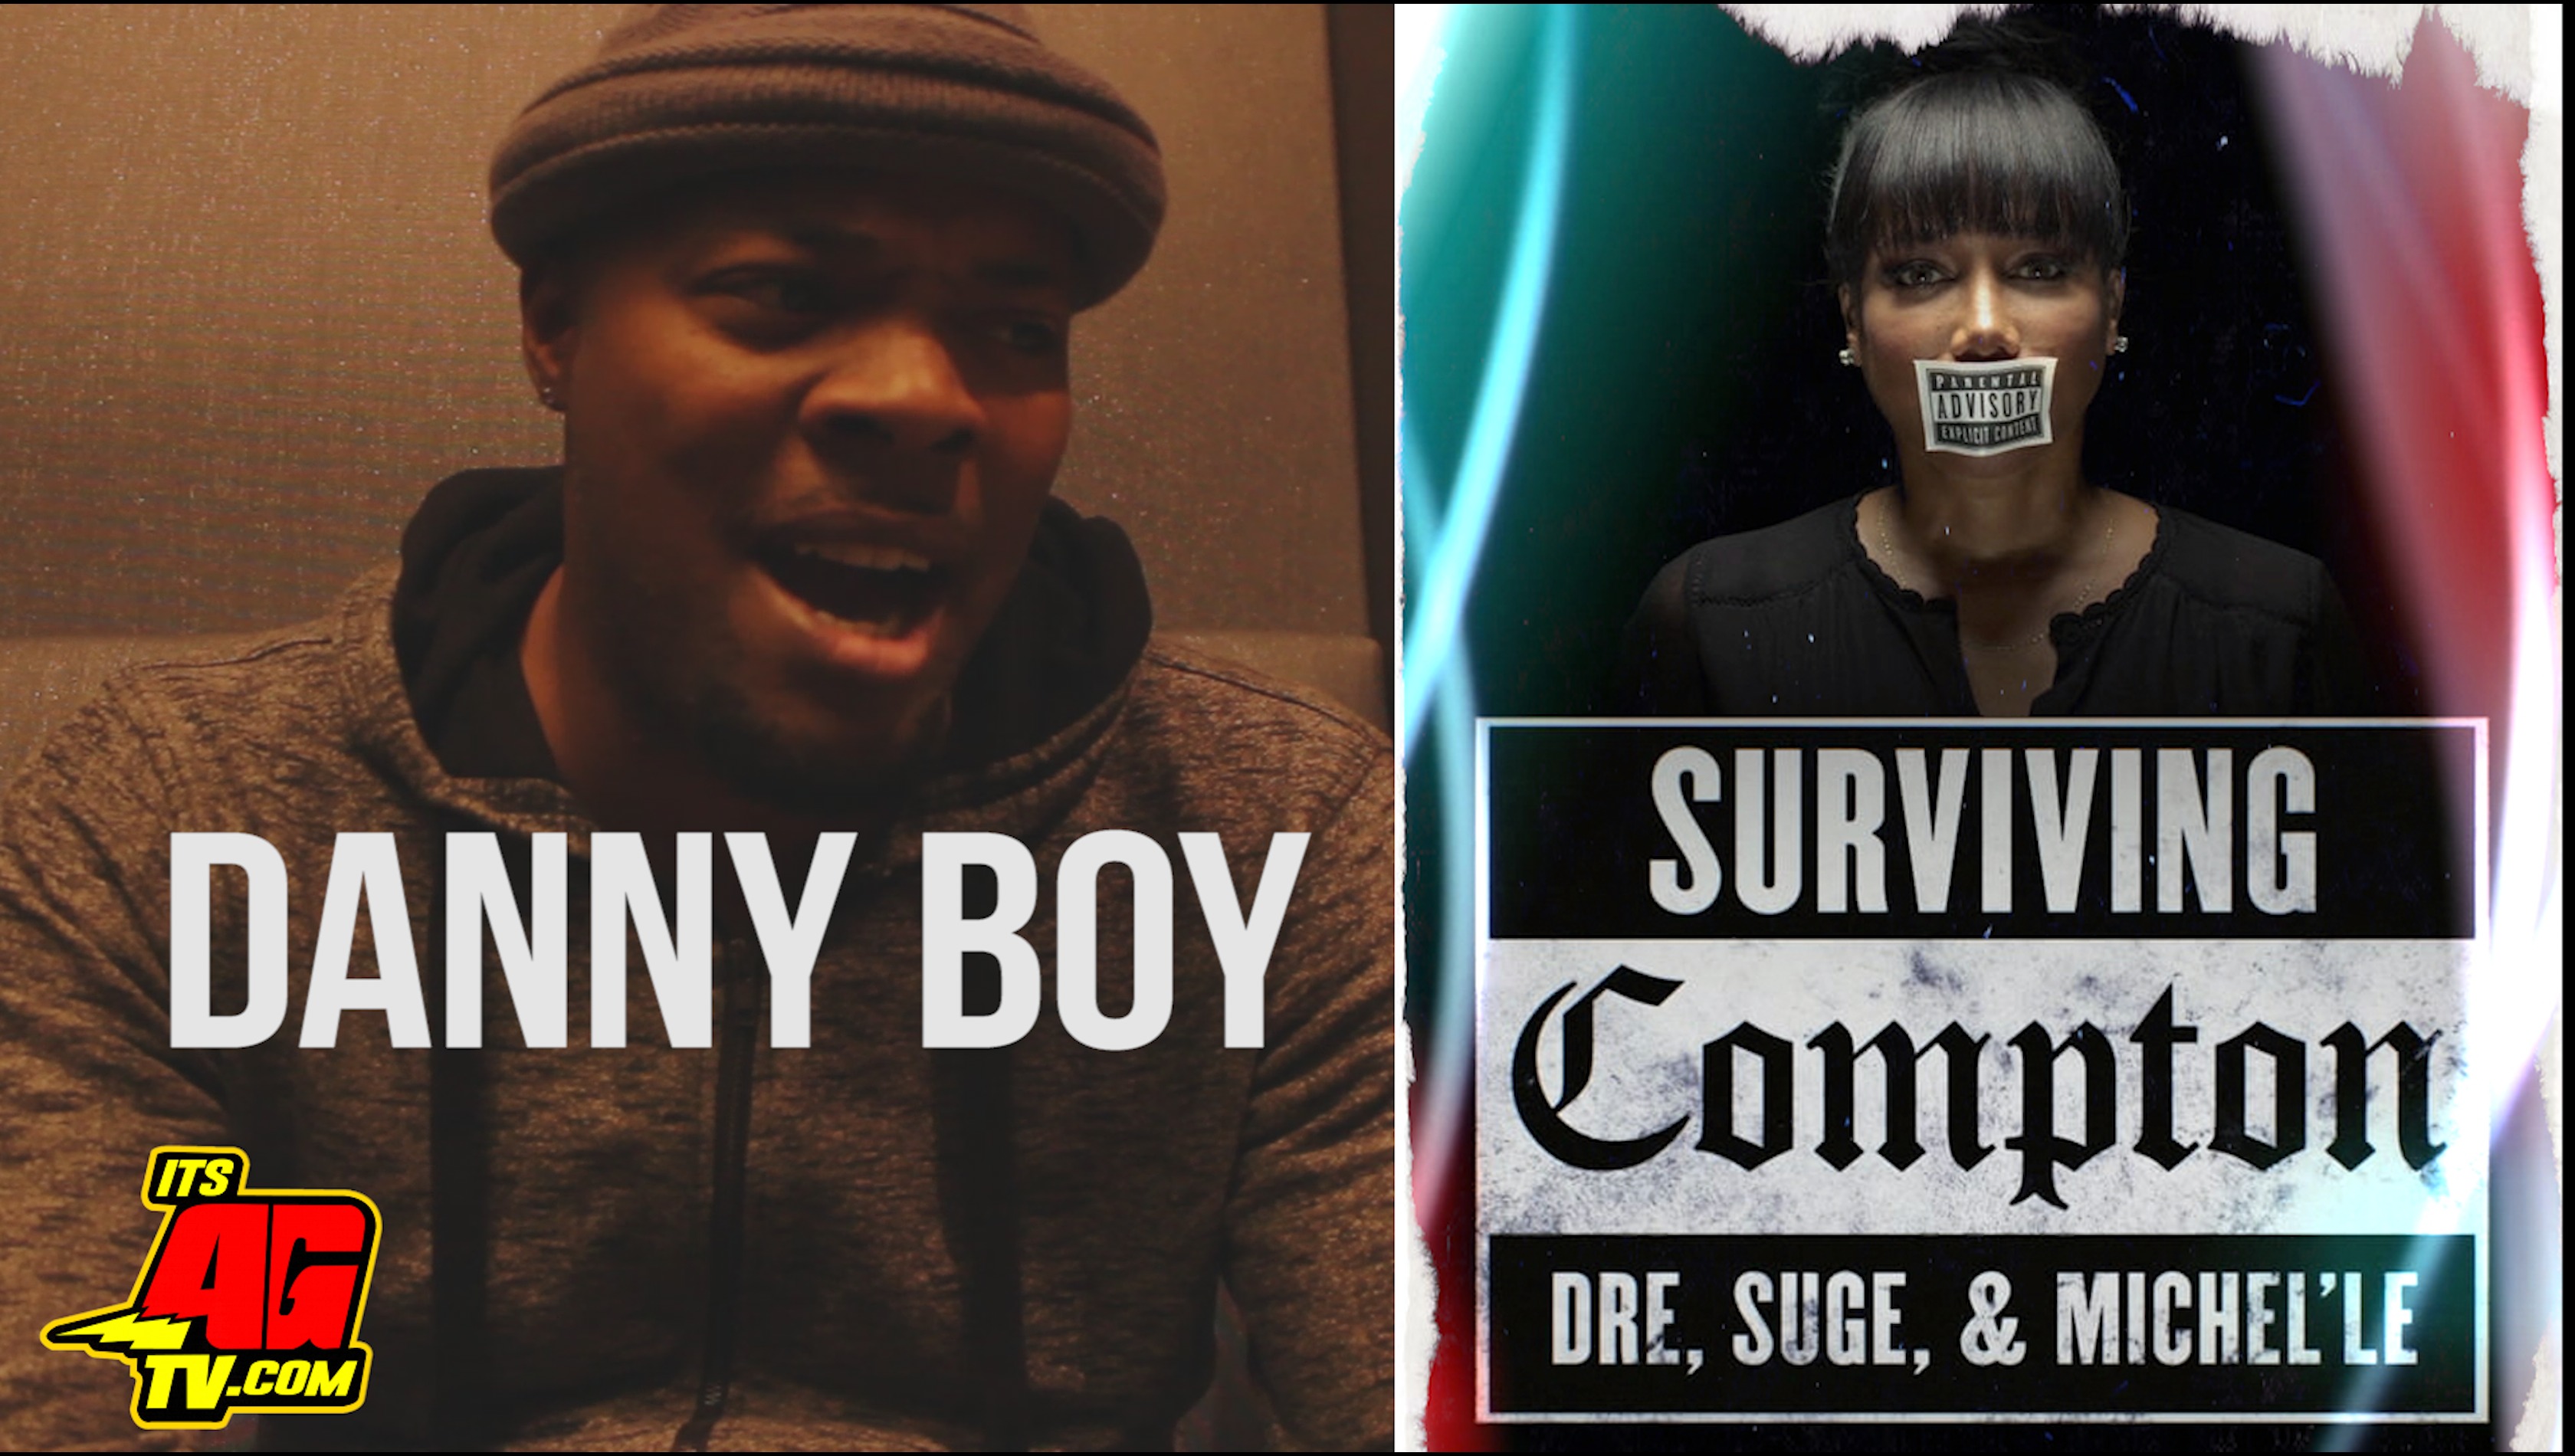 Danny Boy (@iamdannyboy77) on Michel’le Biopic, Says He Never Saw Suge Knight Punk 2Pac